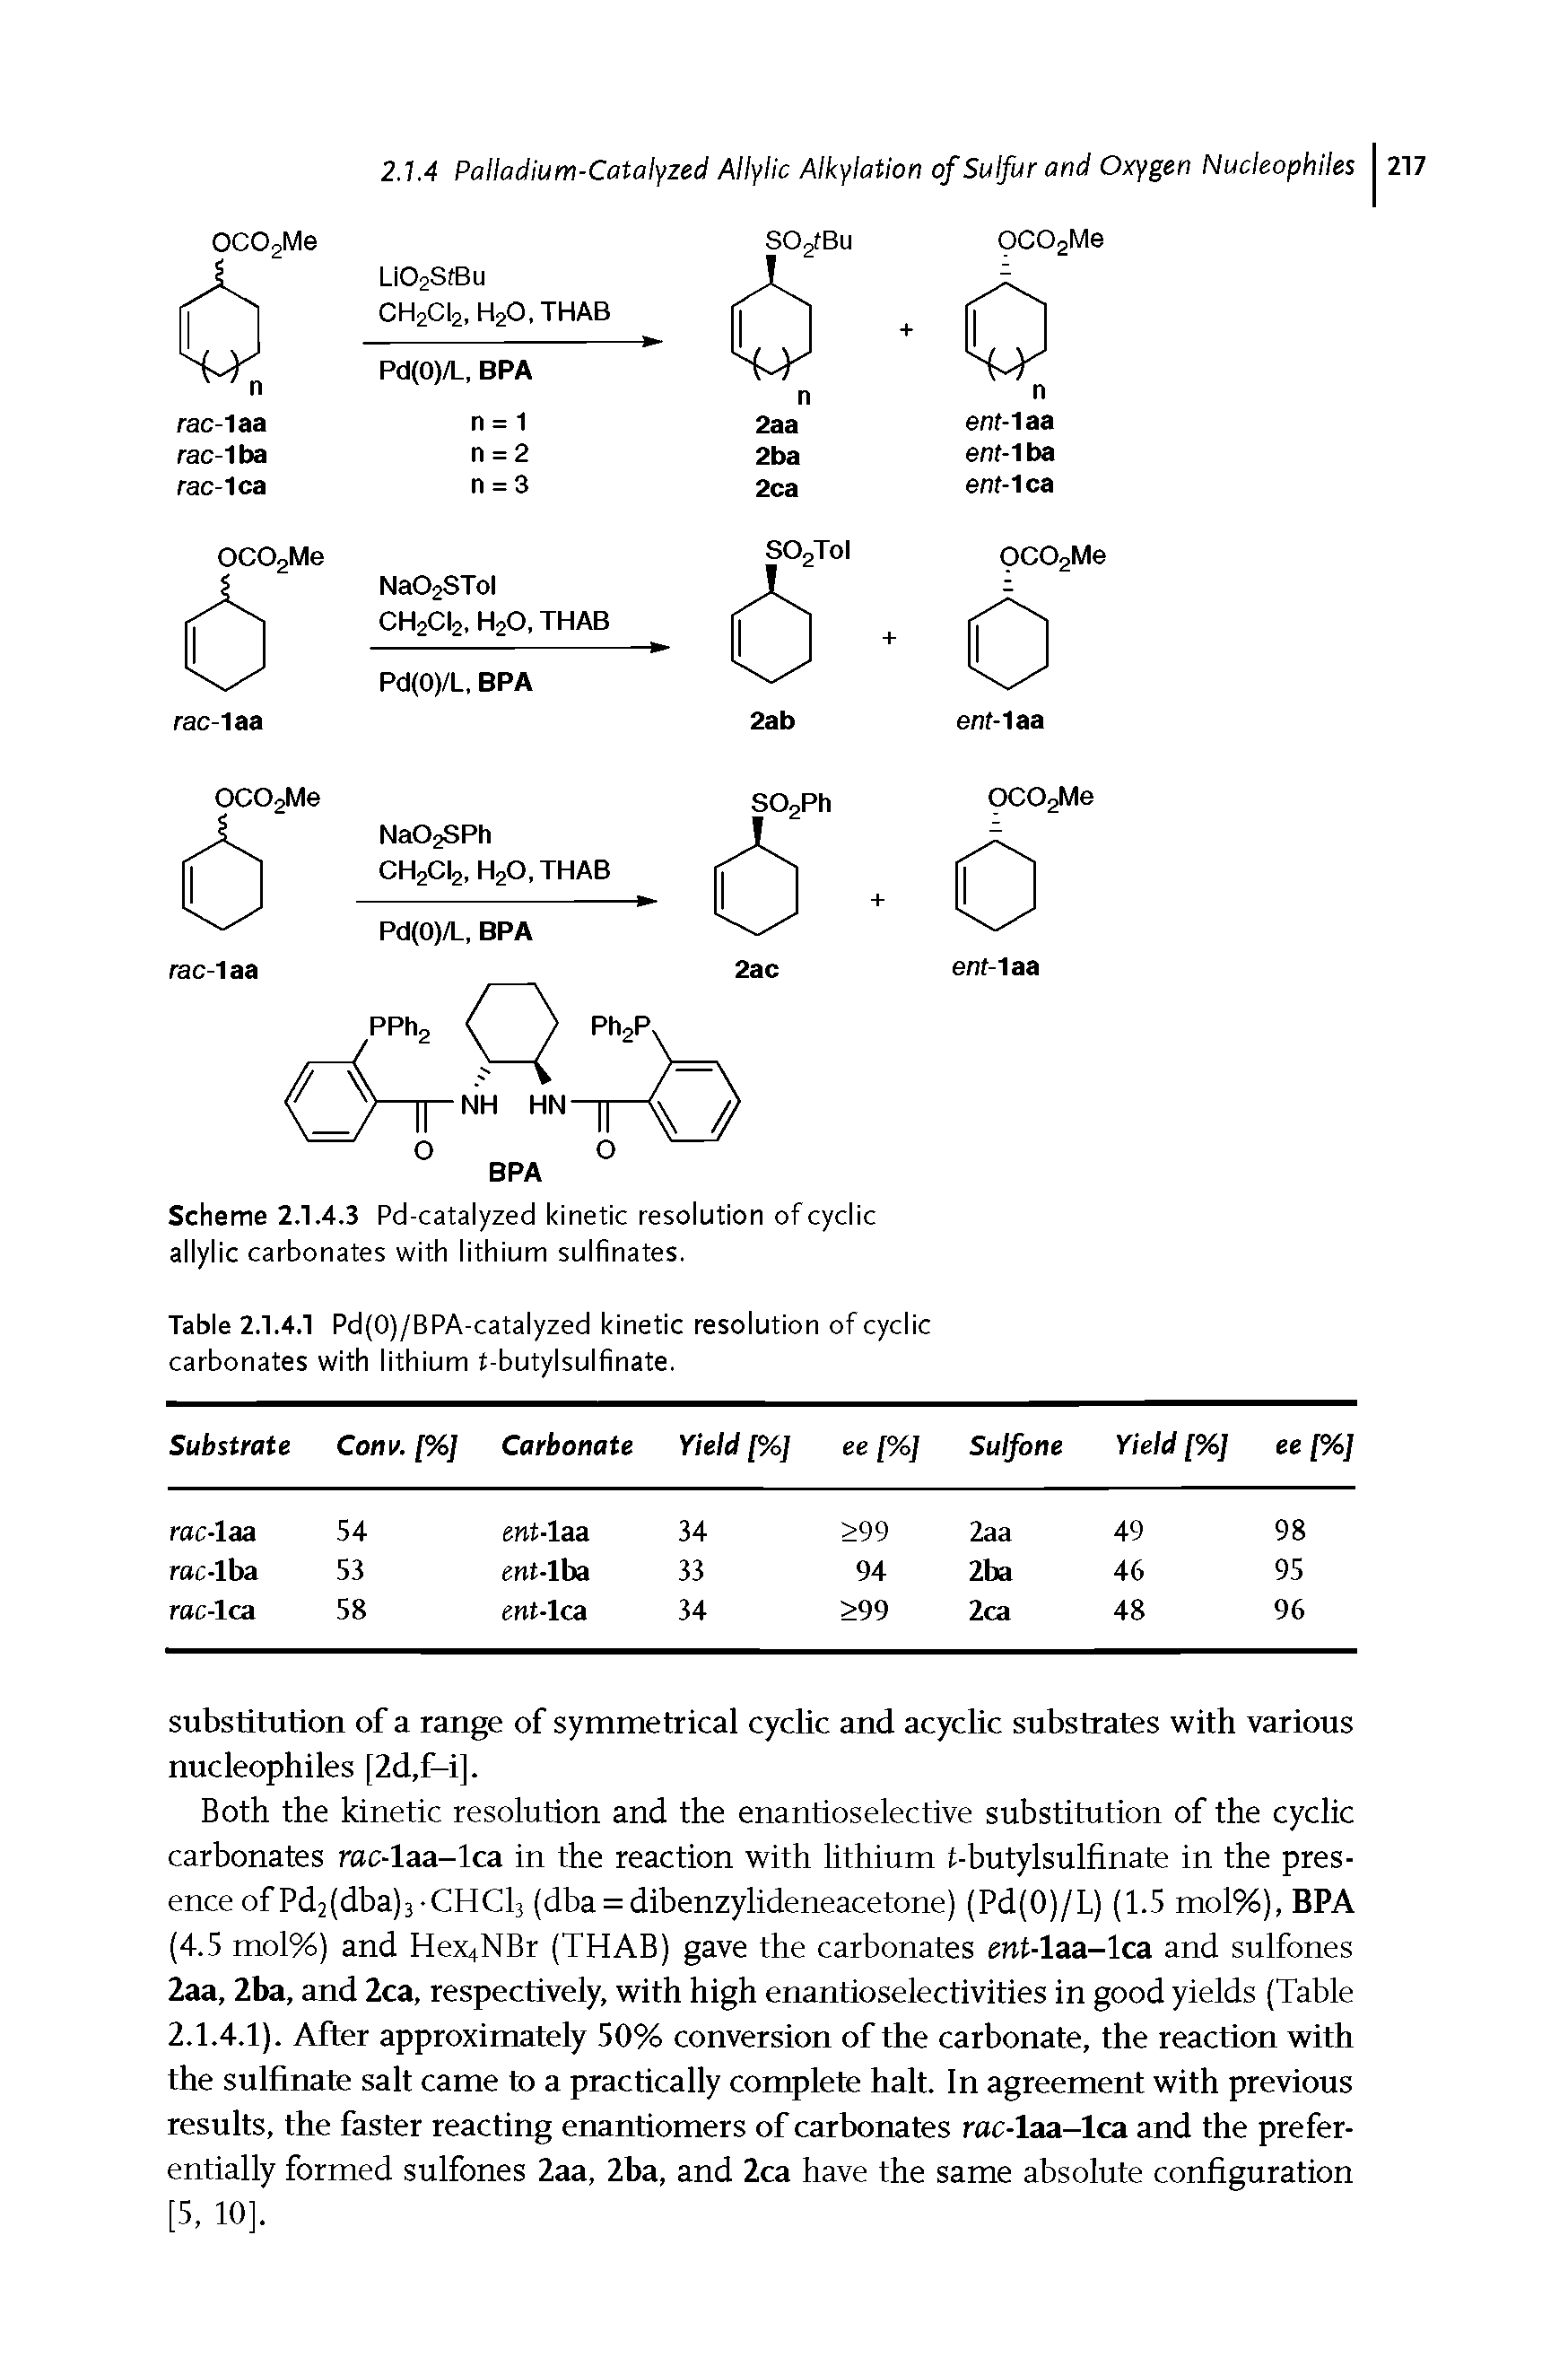 Scheme 2.1.4.3 Pd-catalyzed kinetic resolution of cyclic allylic carbonates with lithium sulfinates.